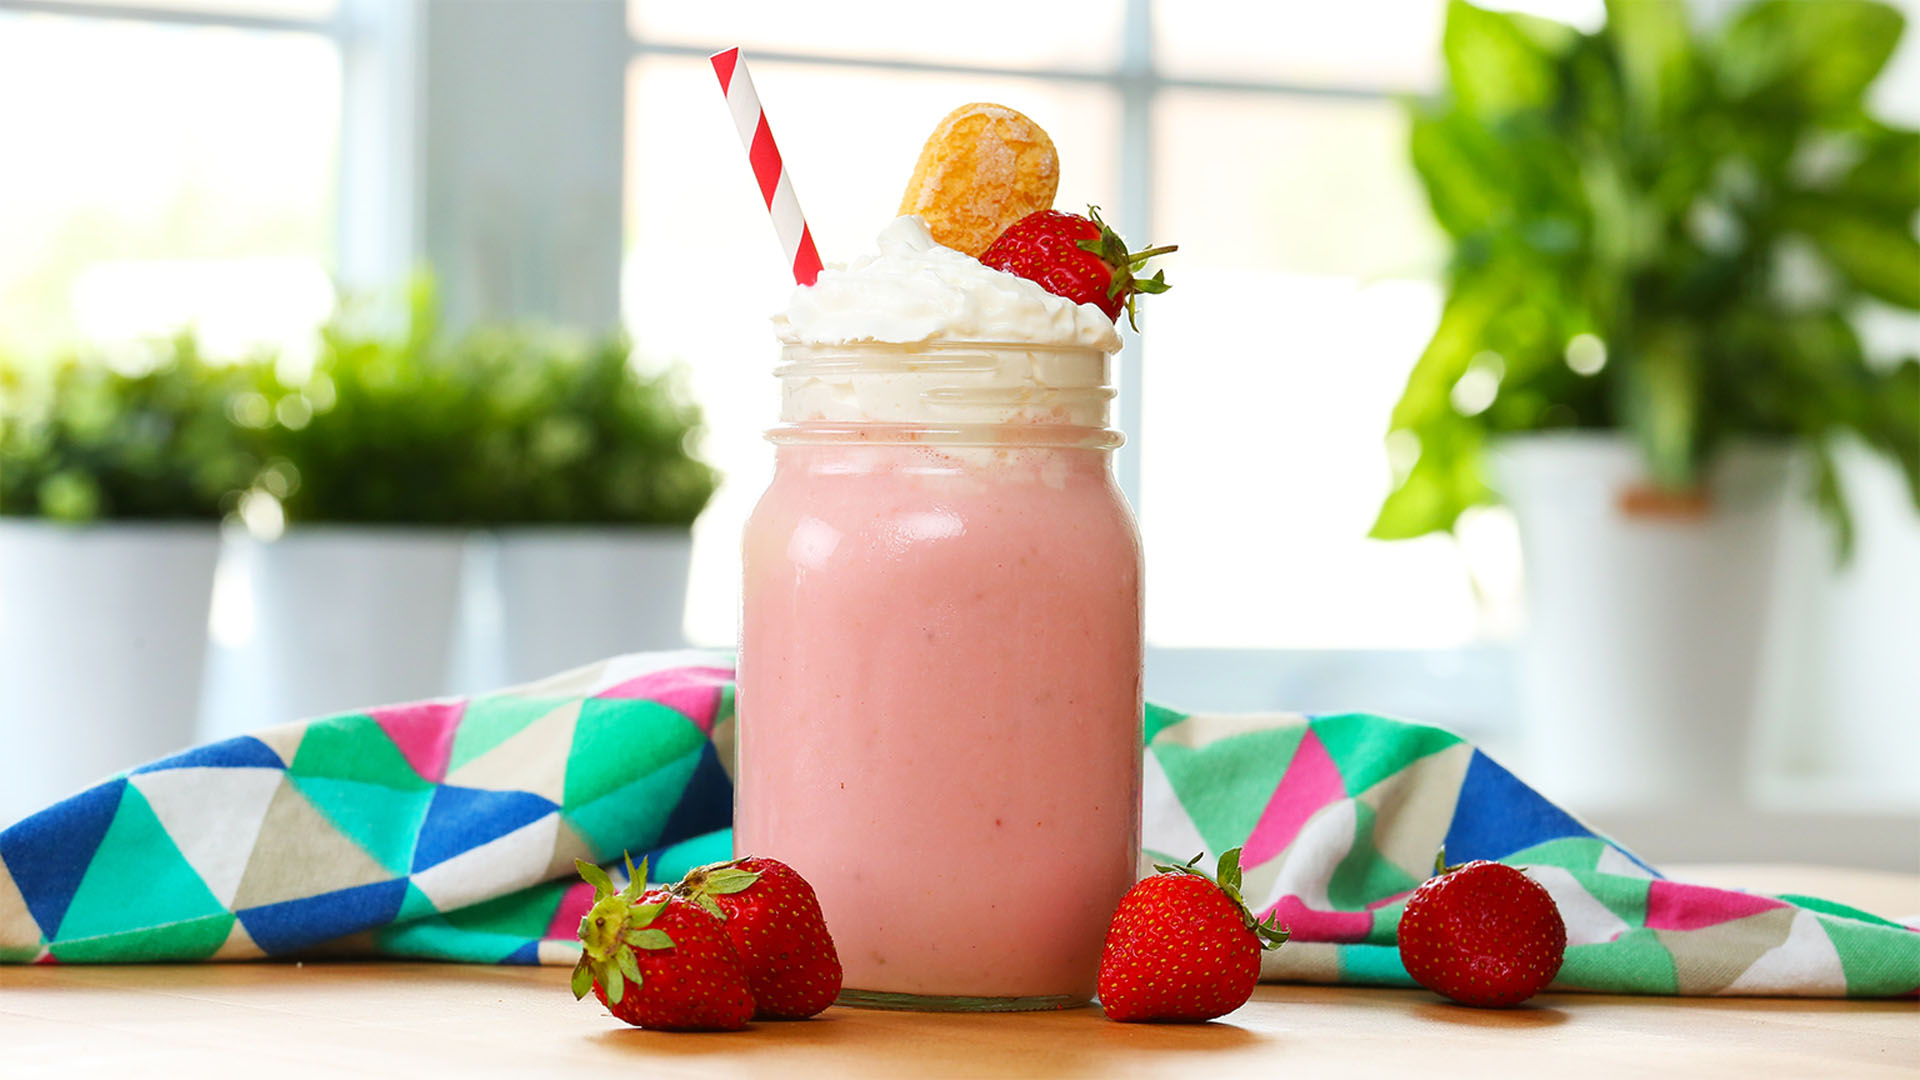 cathy ramsden recommends roxanne is making a strawberry milkshake pic